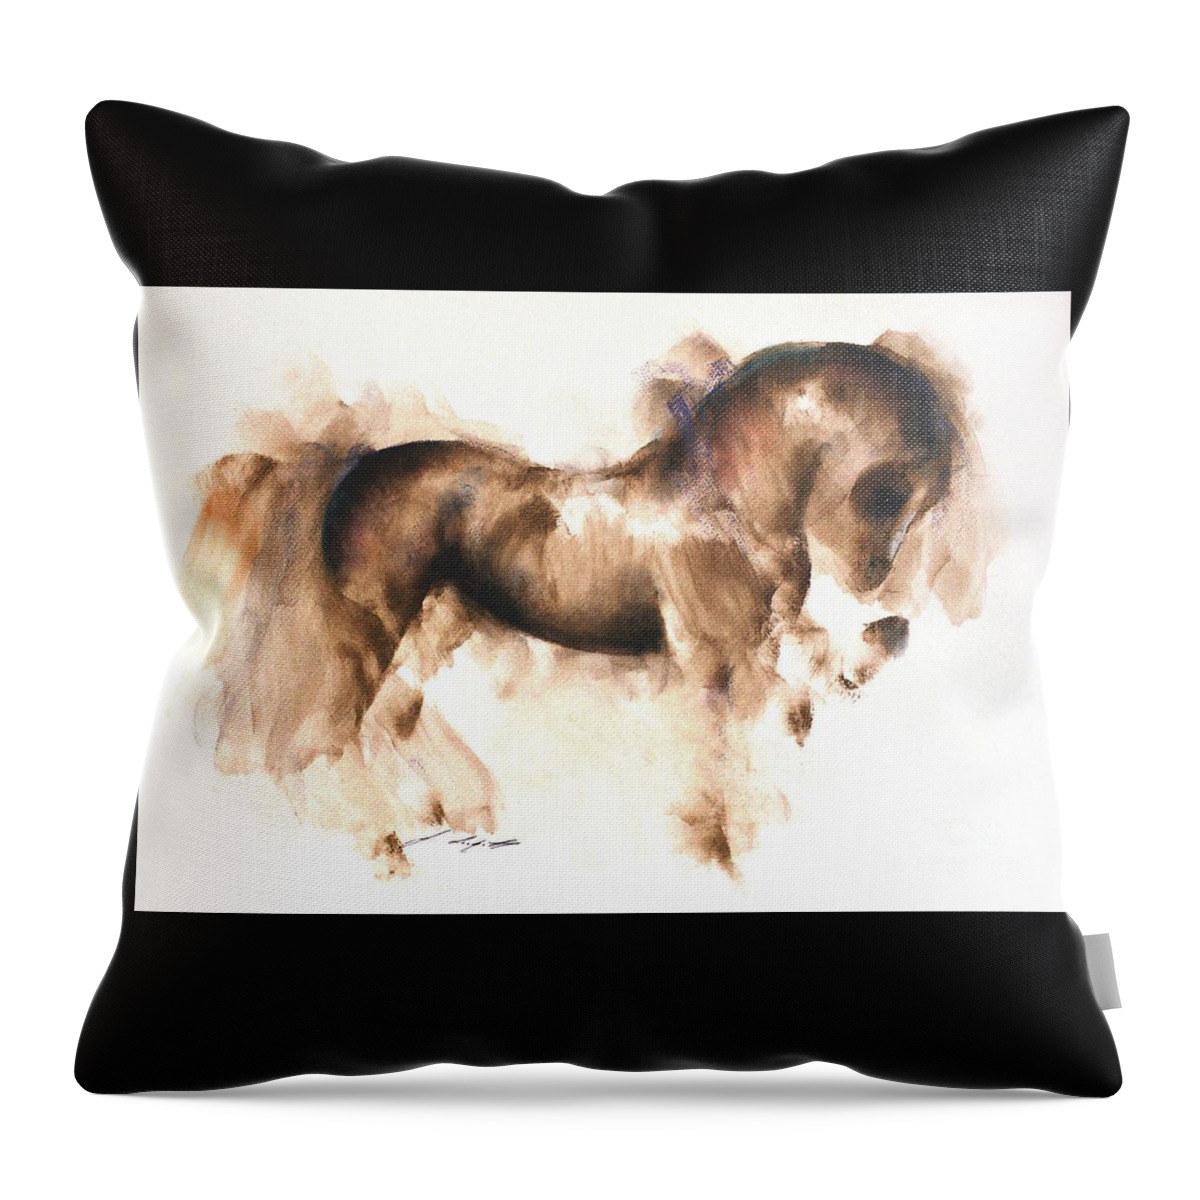 Horse Painting Throw Pillow featuring the painting Meduka by Janette Lockett